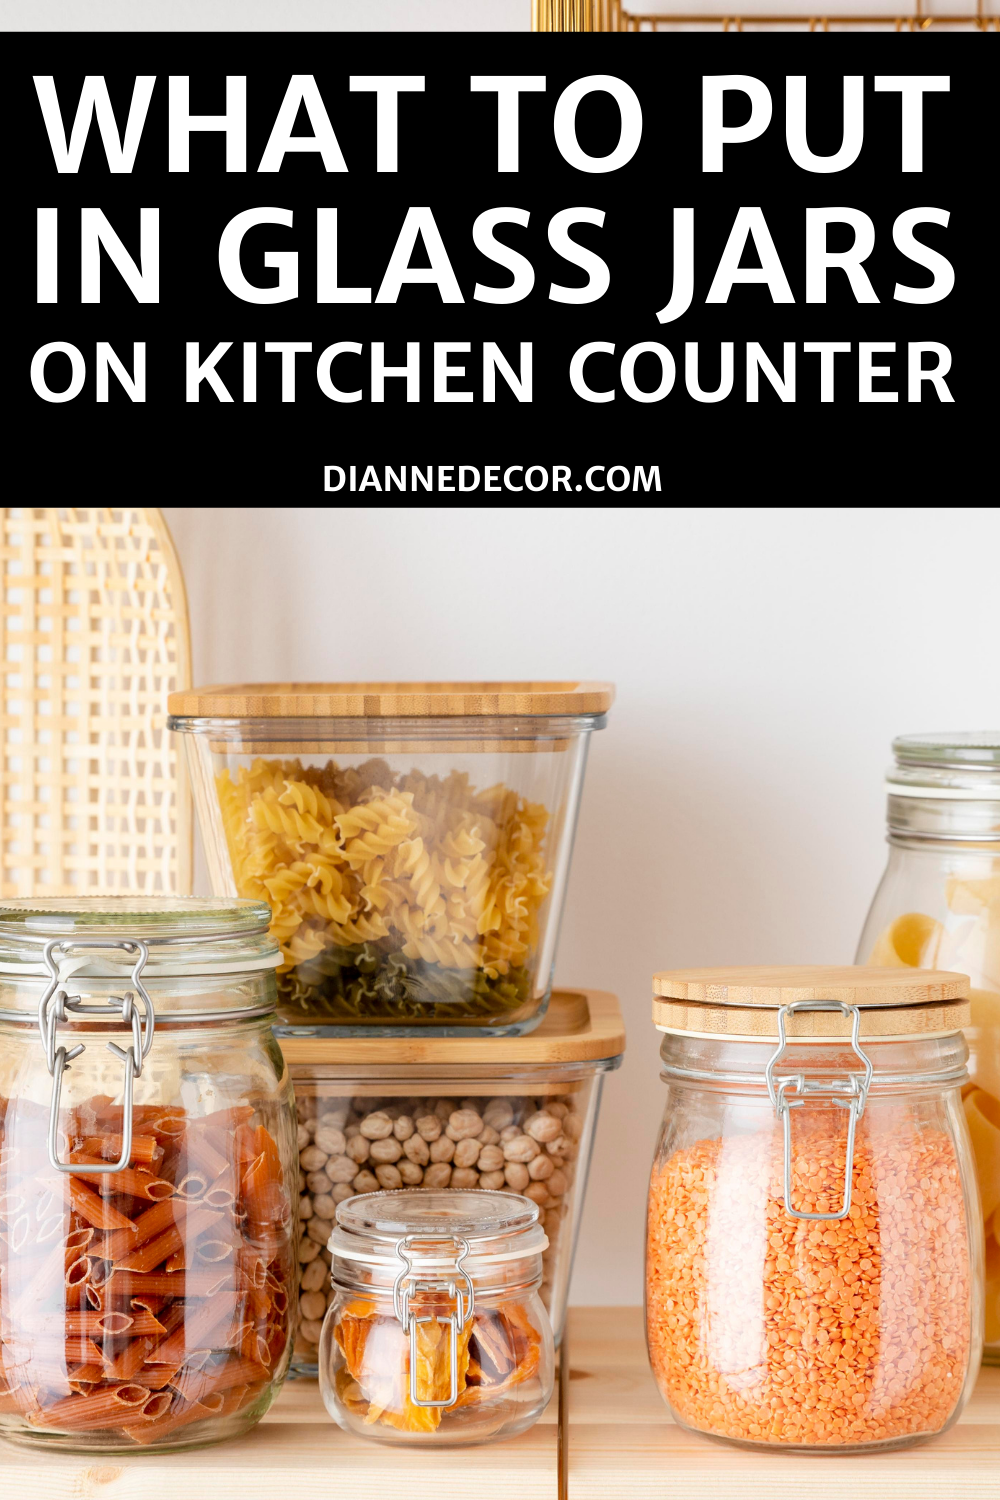 https://diannedecor.com/wp-content/uploads/2022/03/pin-what-to-put-in-glass-jars-on-kitchen-counter.png